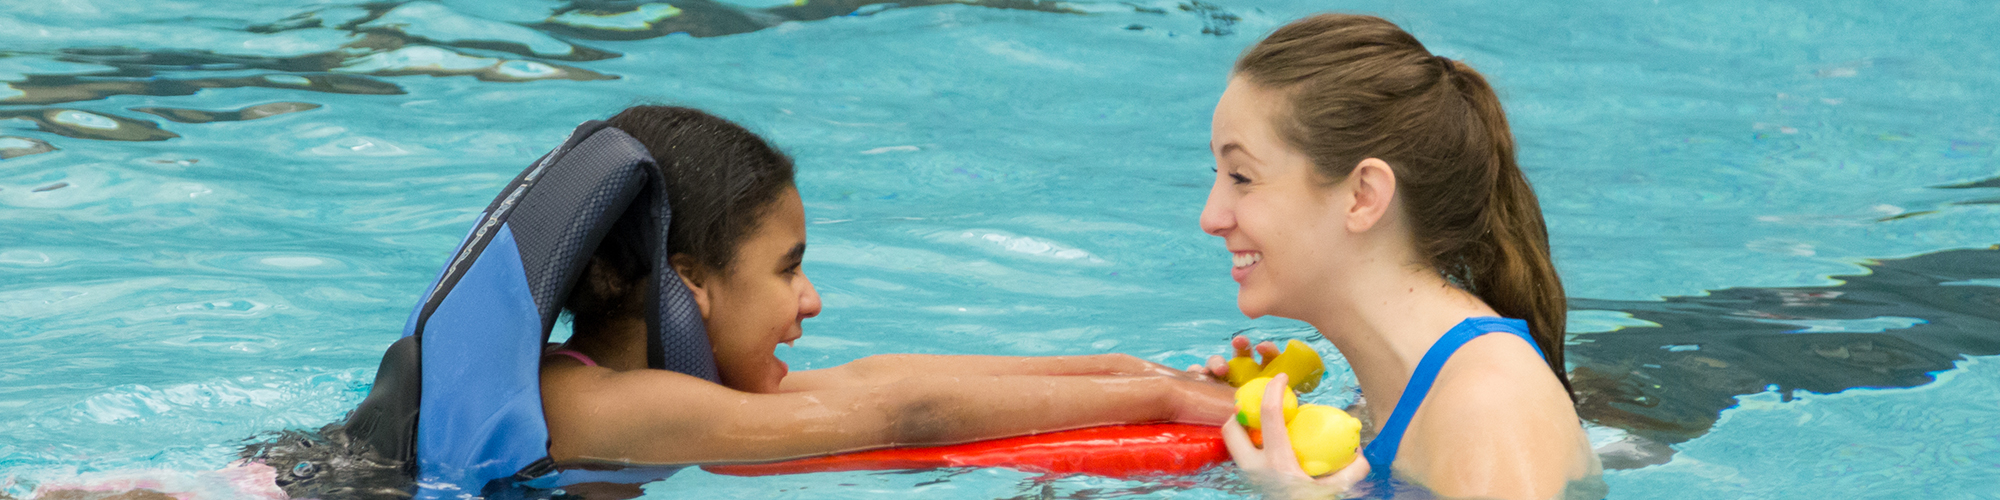 Student plays with young child in the pool.